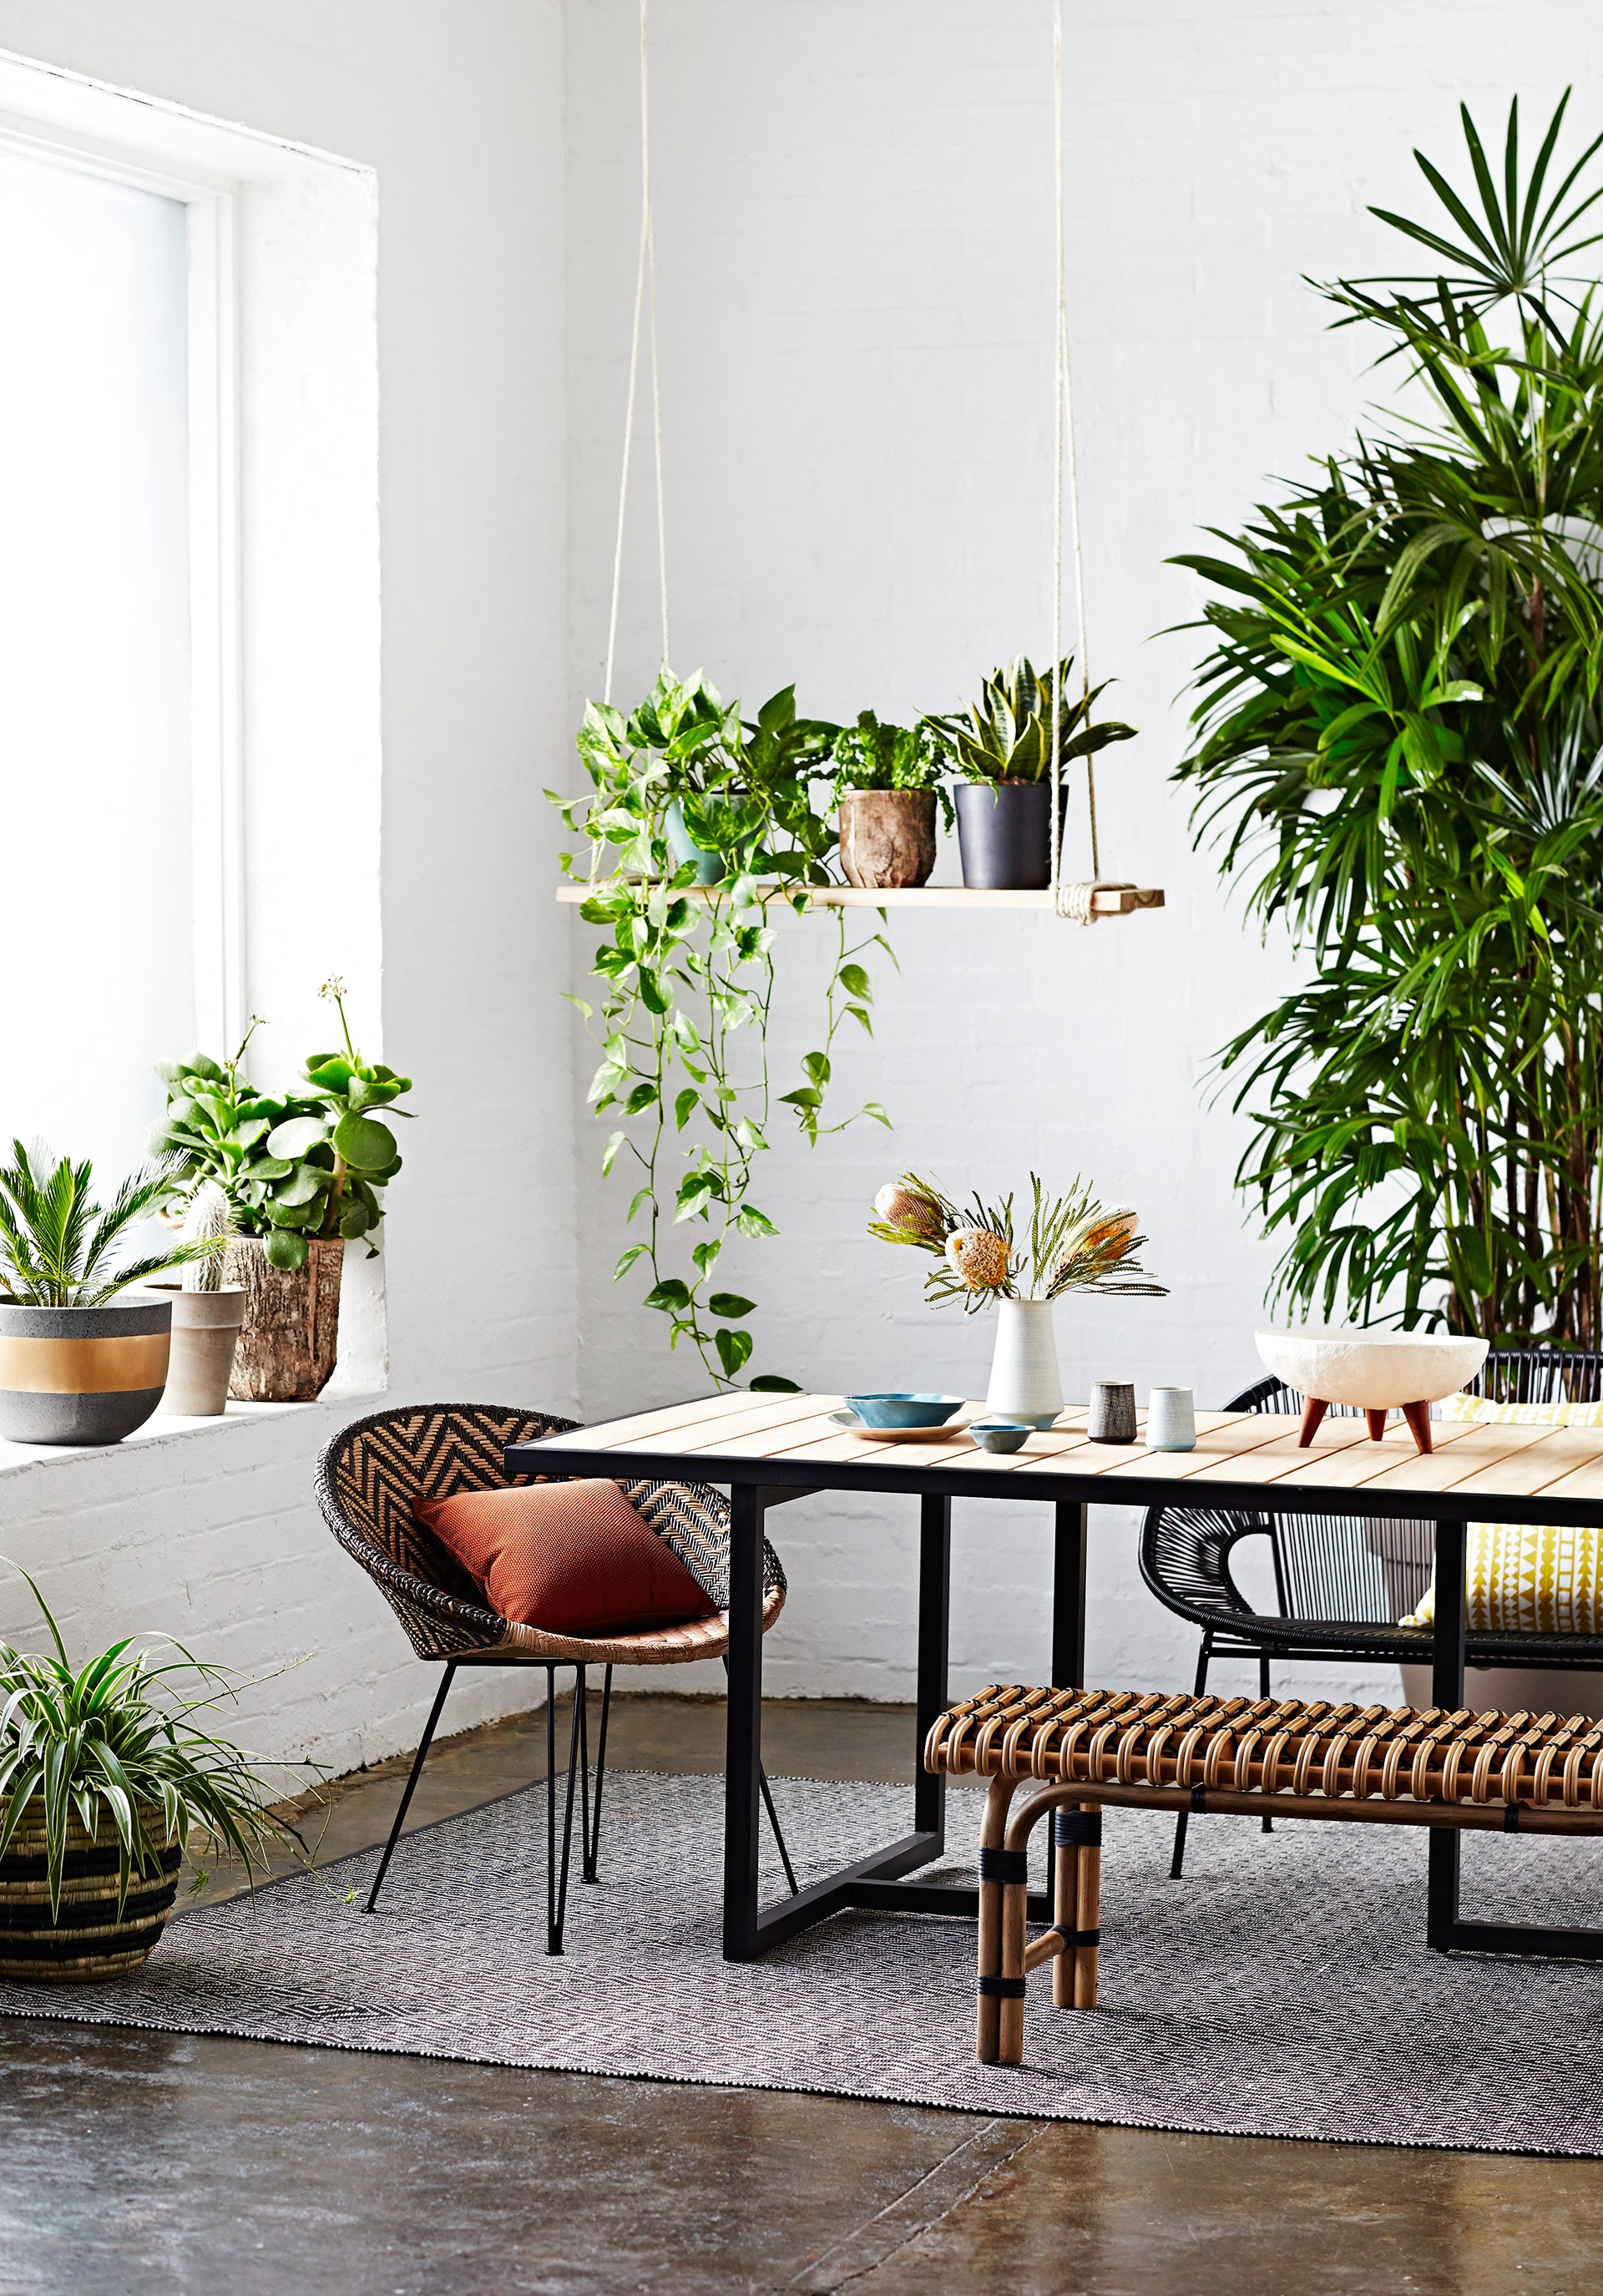 Don't be afraid to bring your garden indoors. Photo: Mike Baker / Australian House & Garden